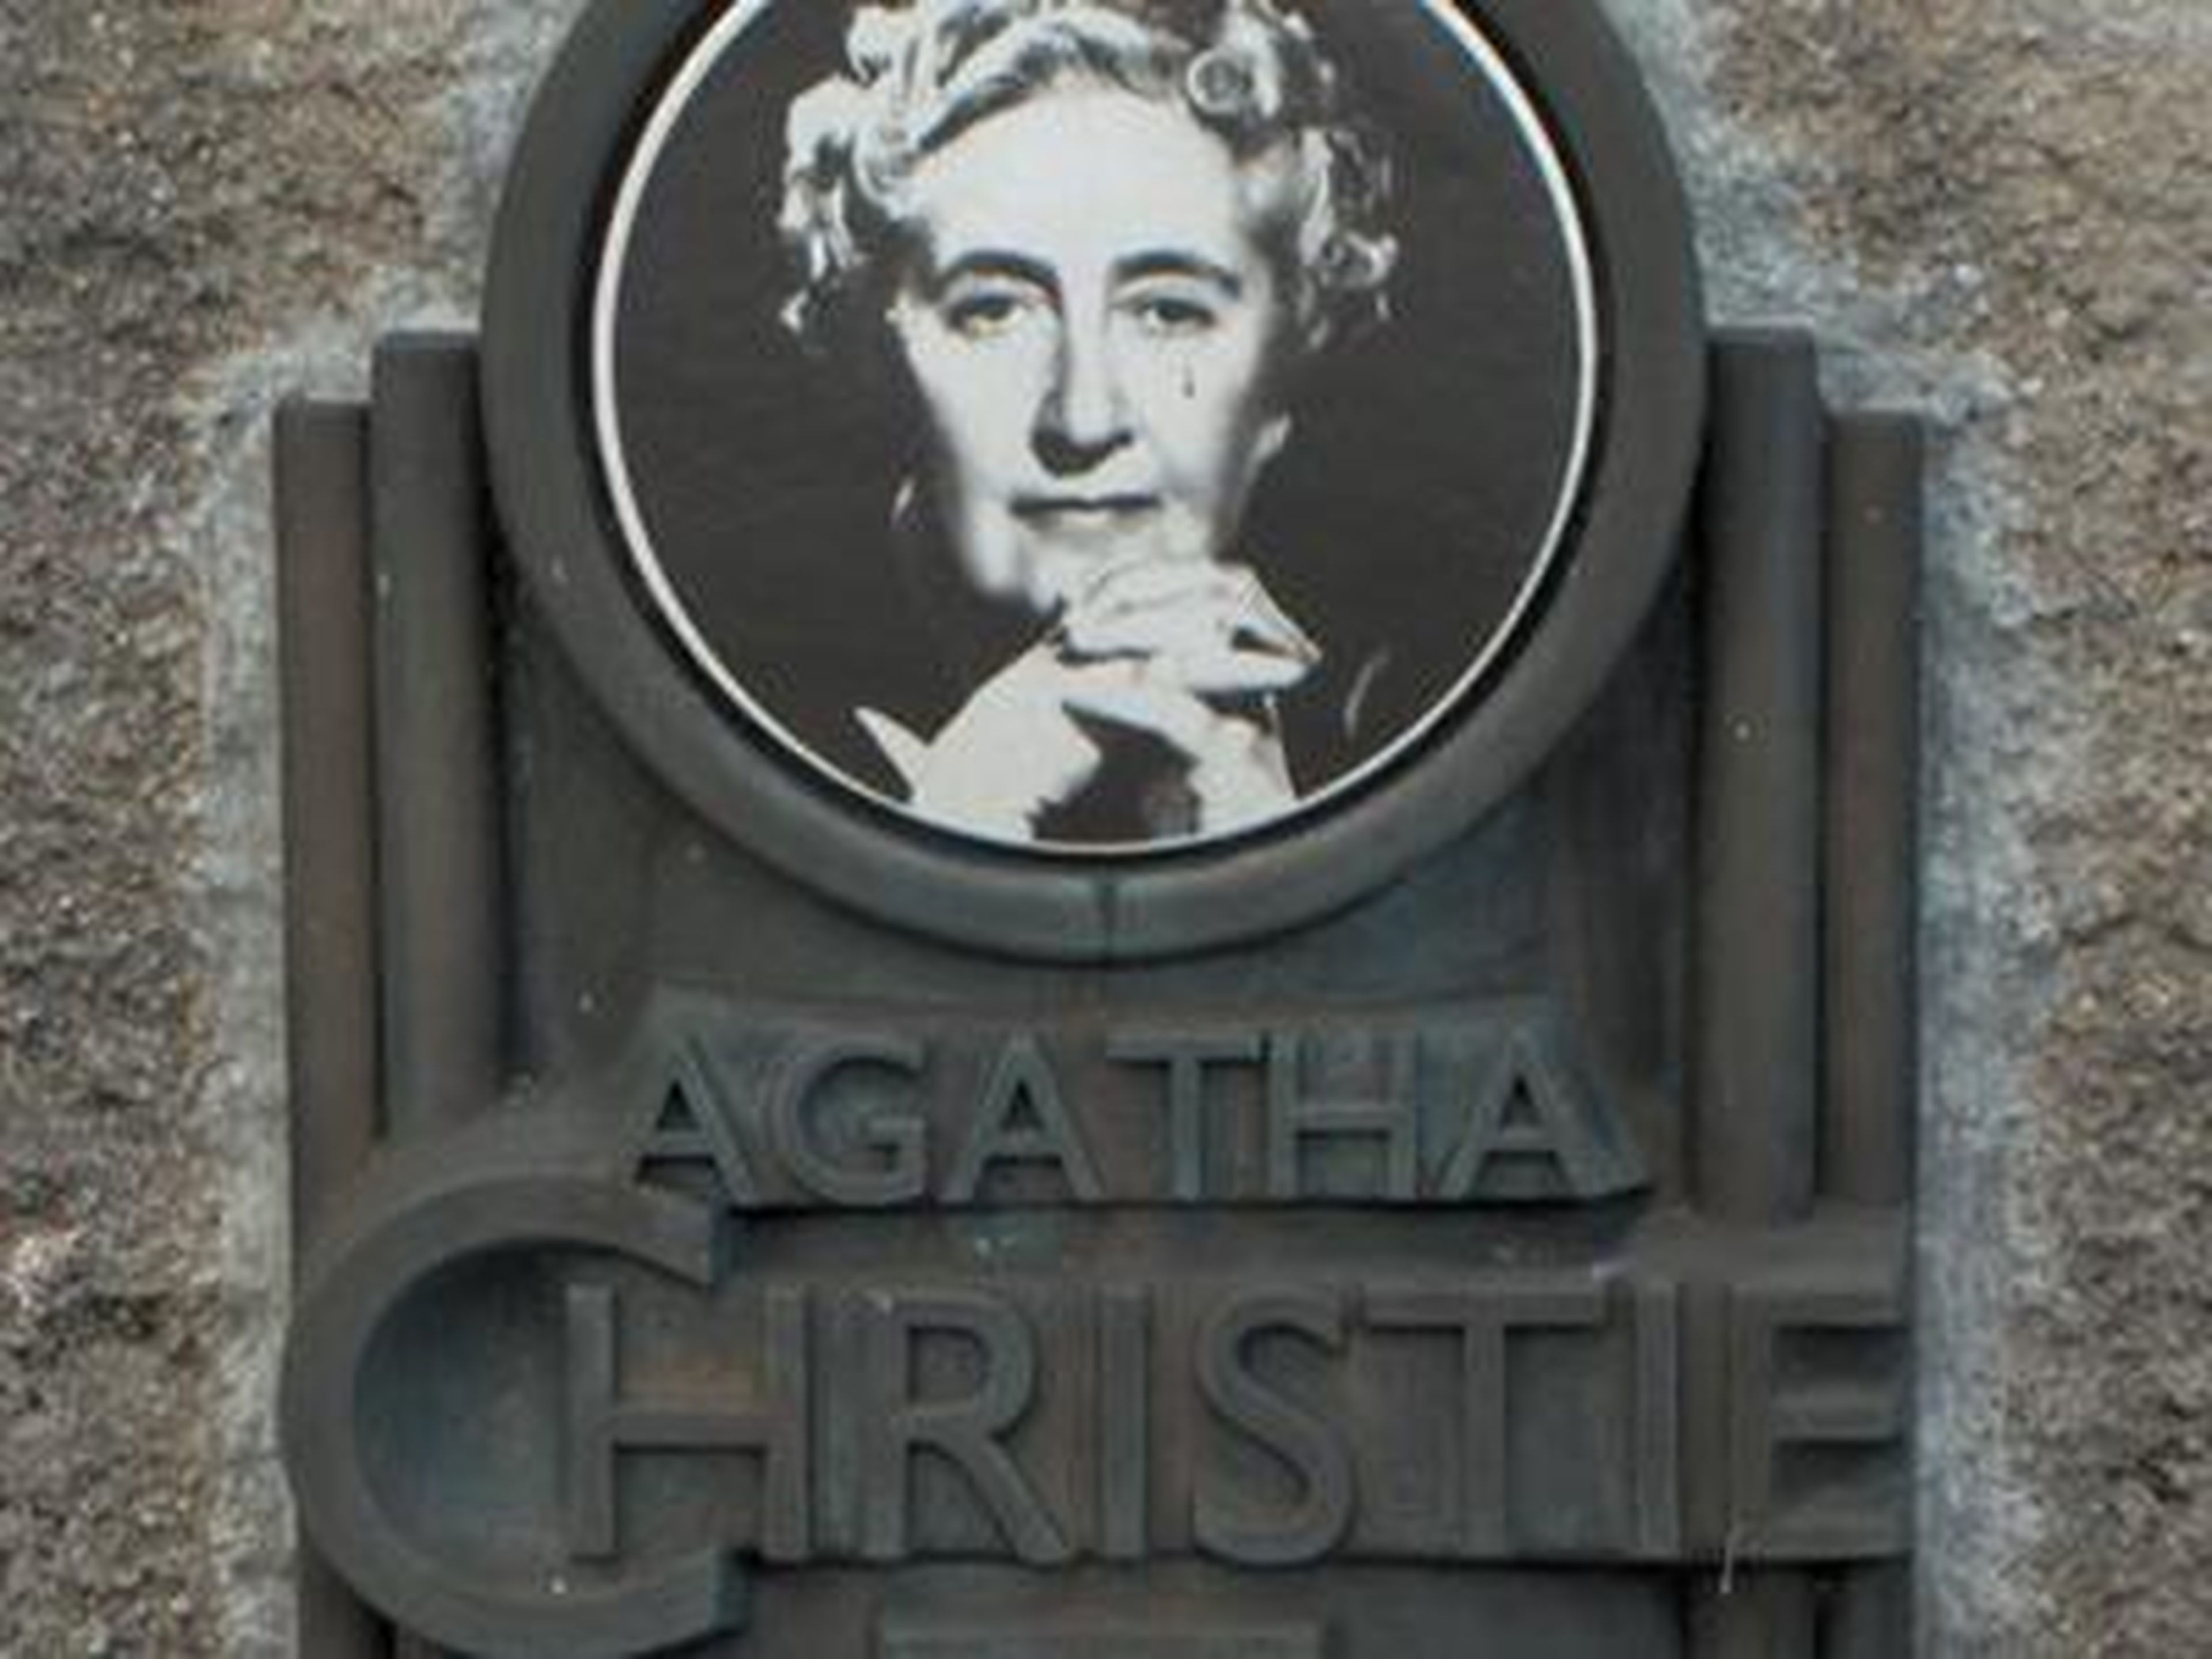 Mystery writer Agatha Christie was home-schooled by her father and taught herself how to read at just five years old.